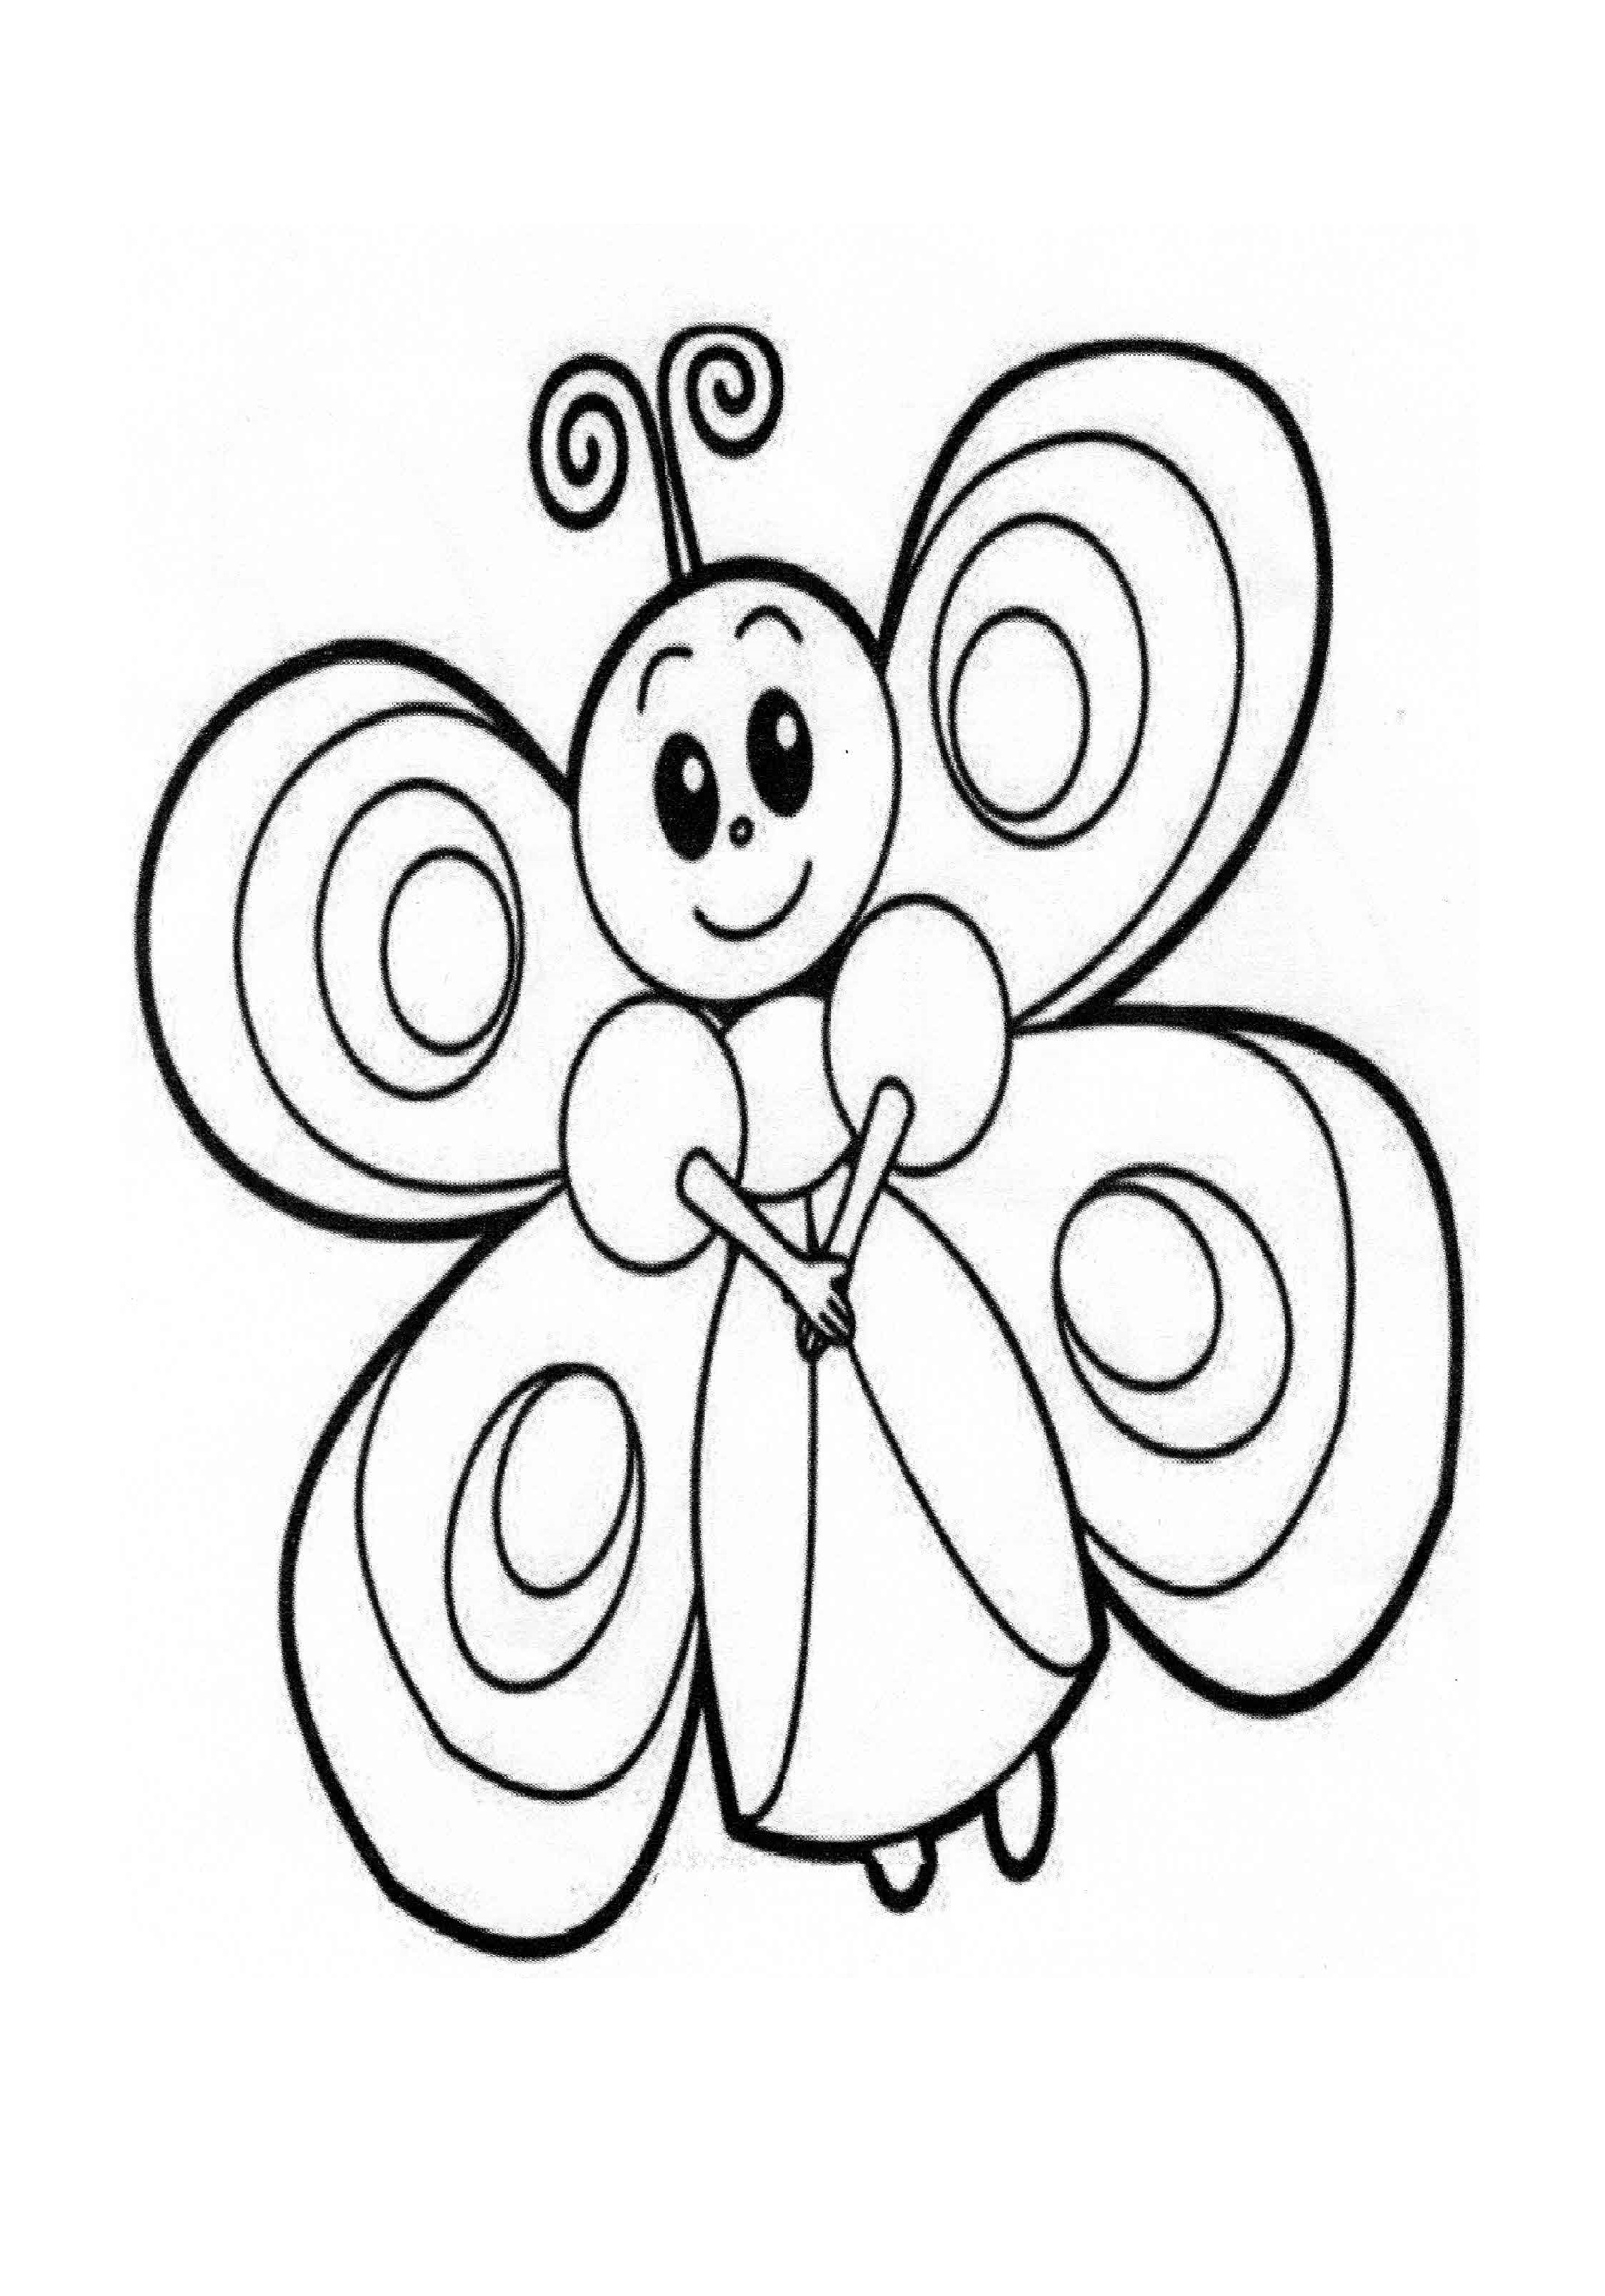 Butterfly Coloring Page - Preschool and Kindergarten